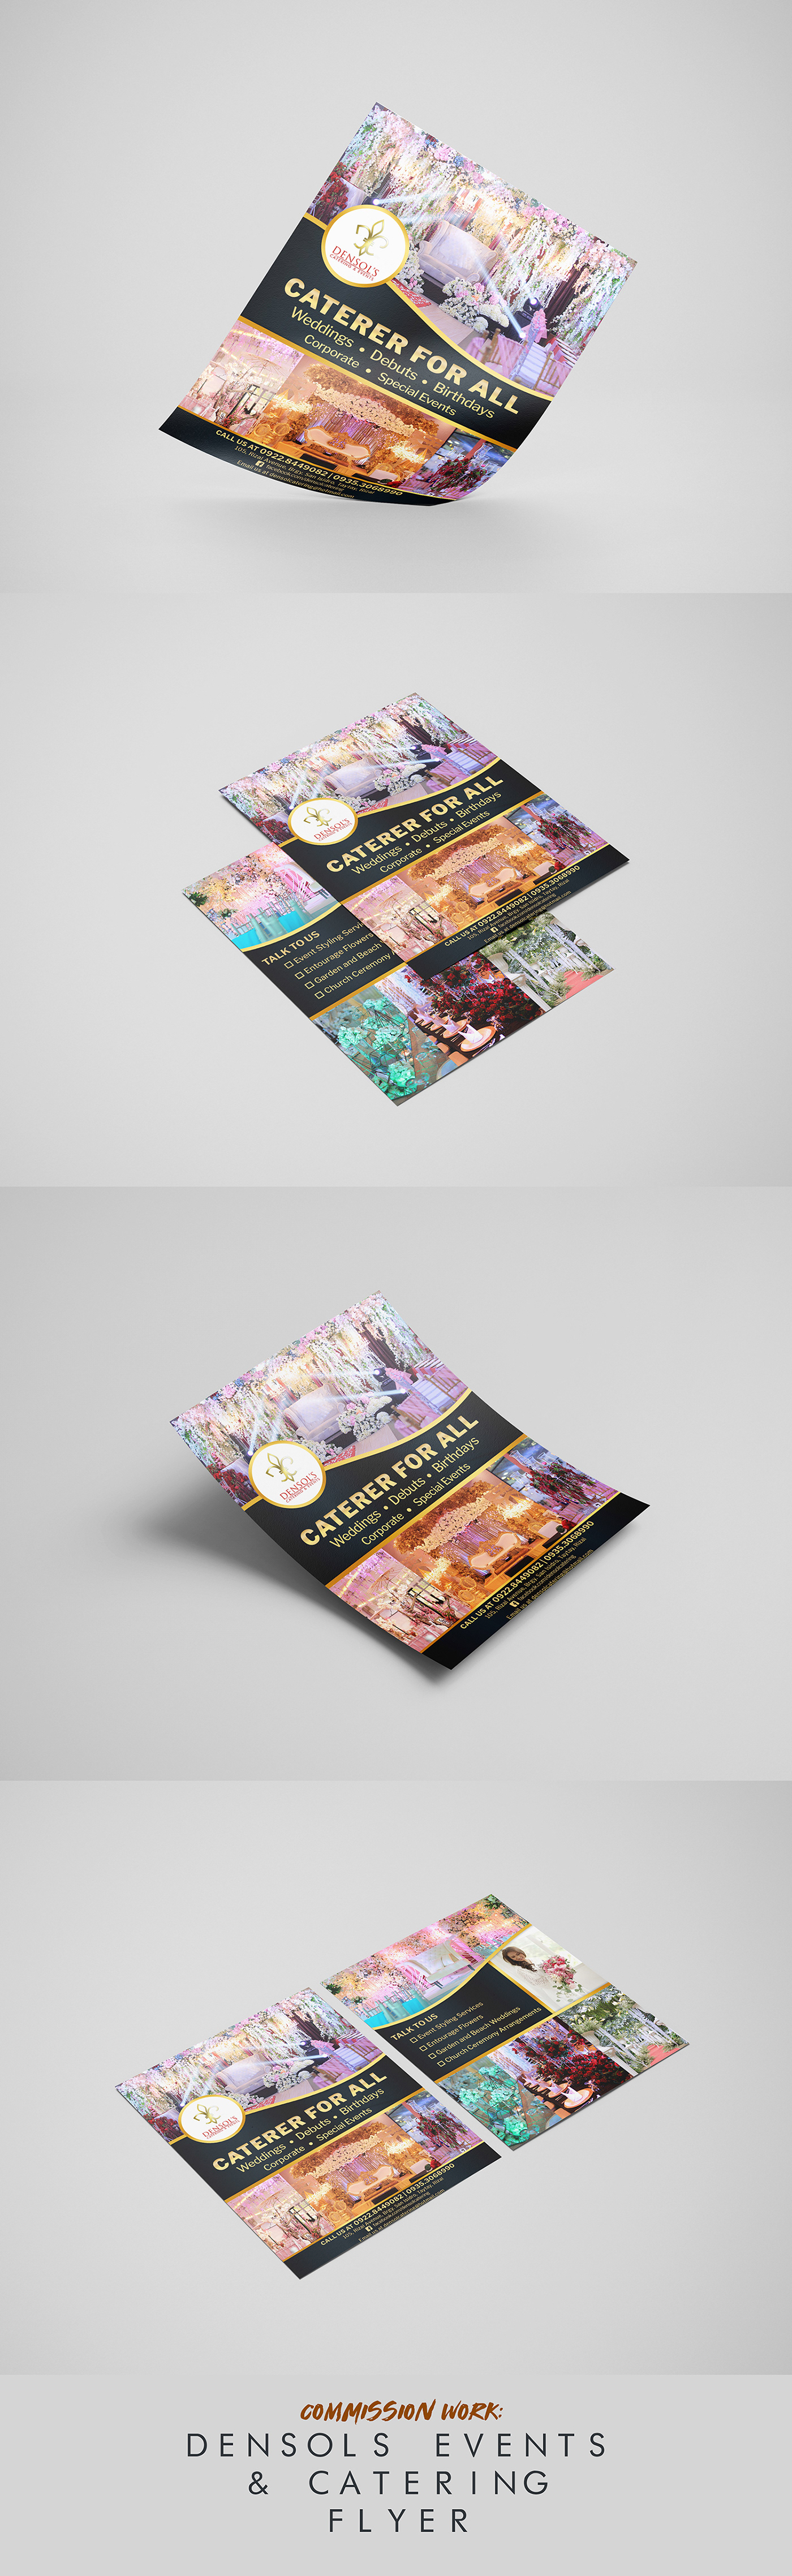 flyer graphicdesign printdesign corporate branding  Events densolscatering&events